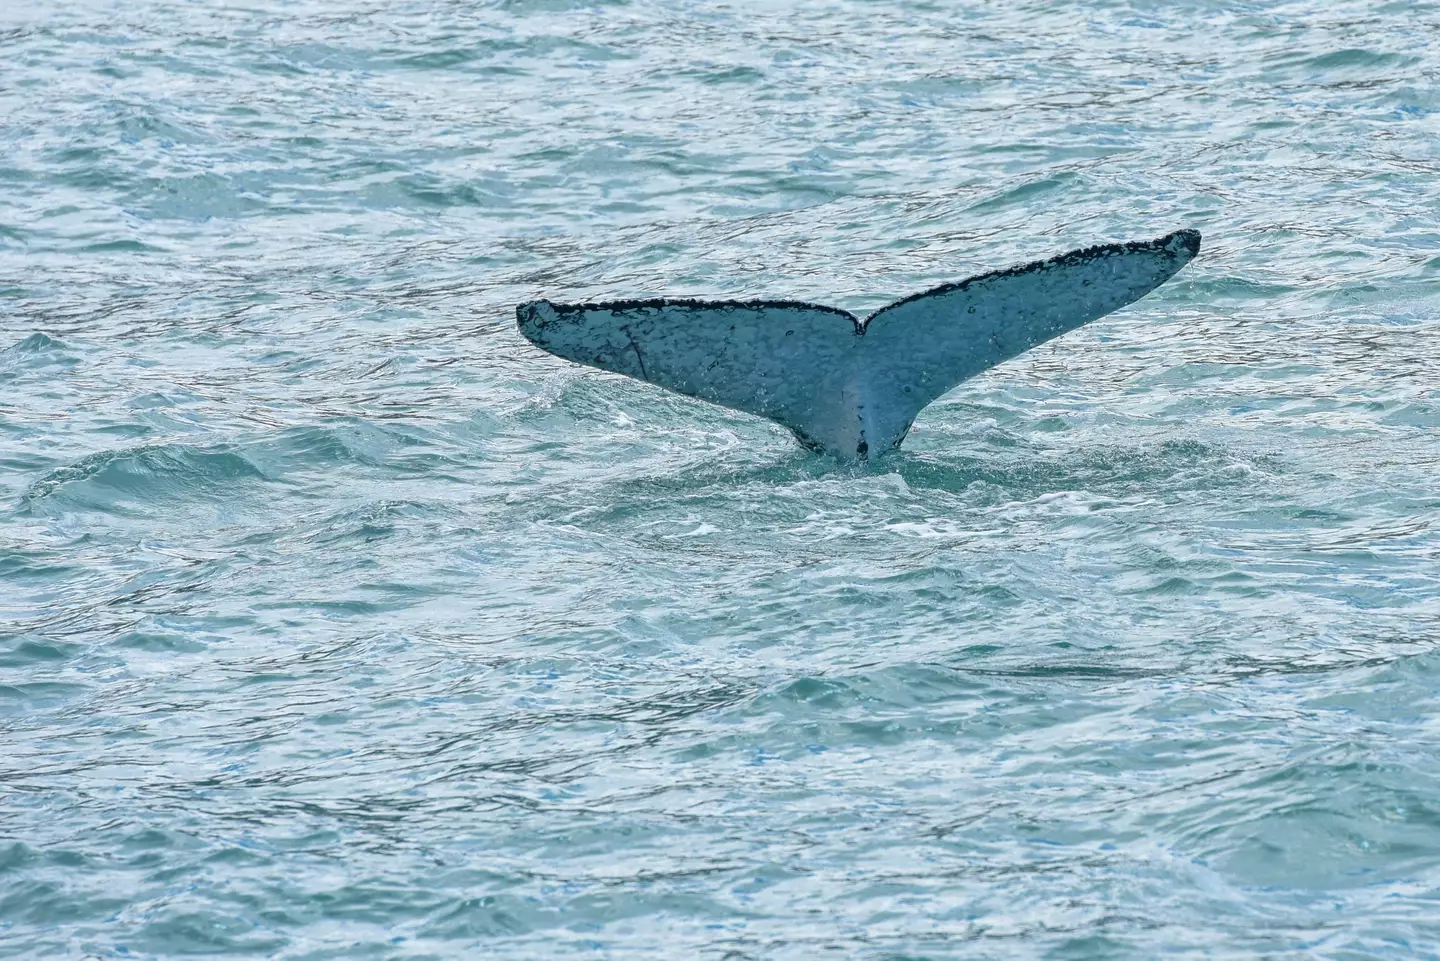 The number of whales in the area has grown in recent years.